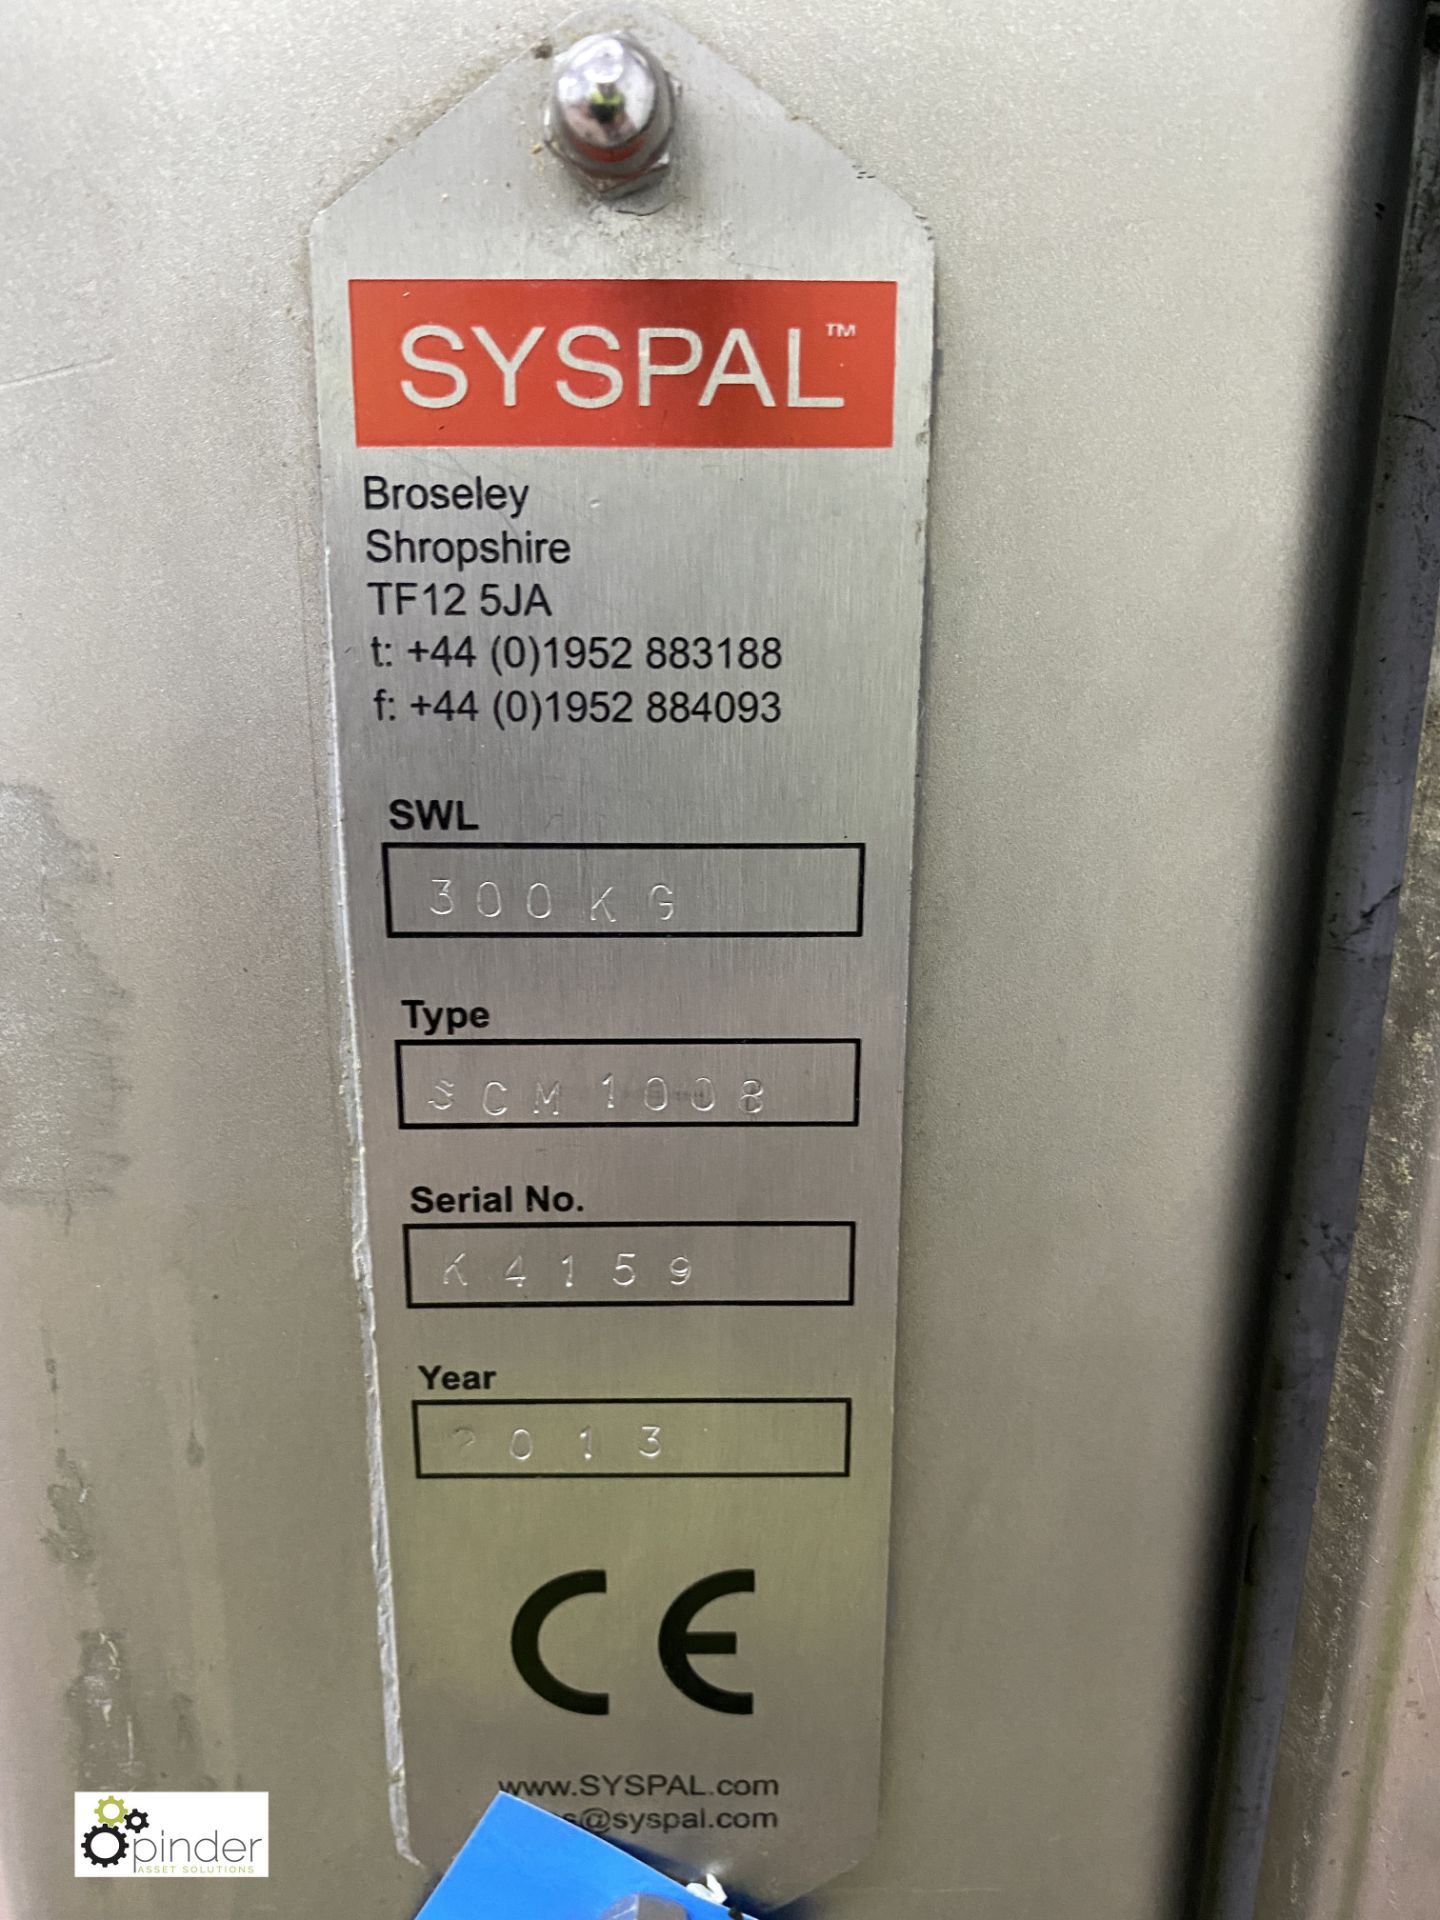 Syspal SCM1008 stainless steel mobile Bin Lift, 30 - Image 4 of 5